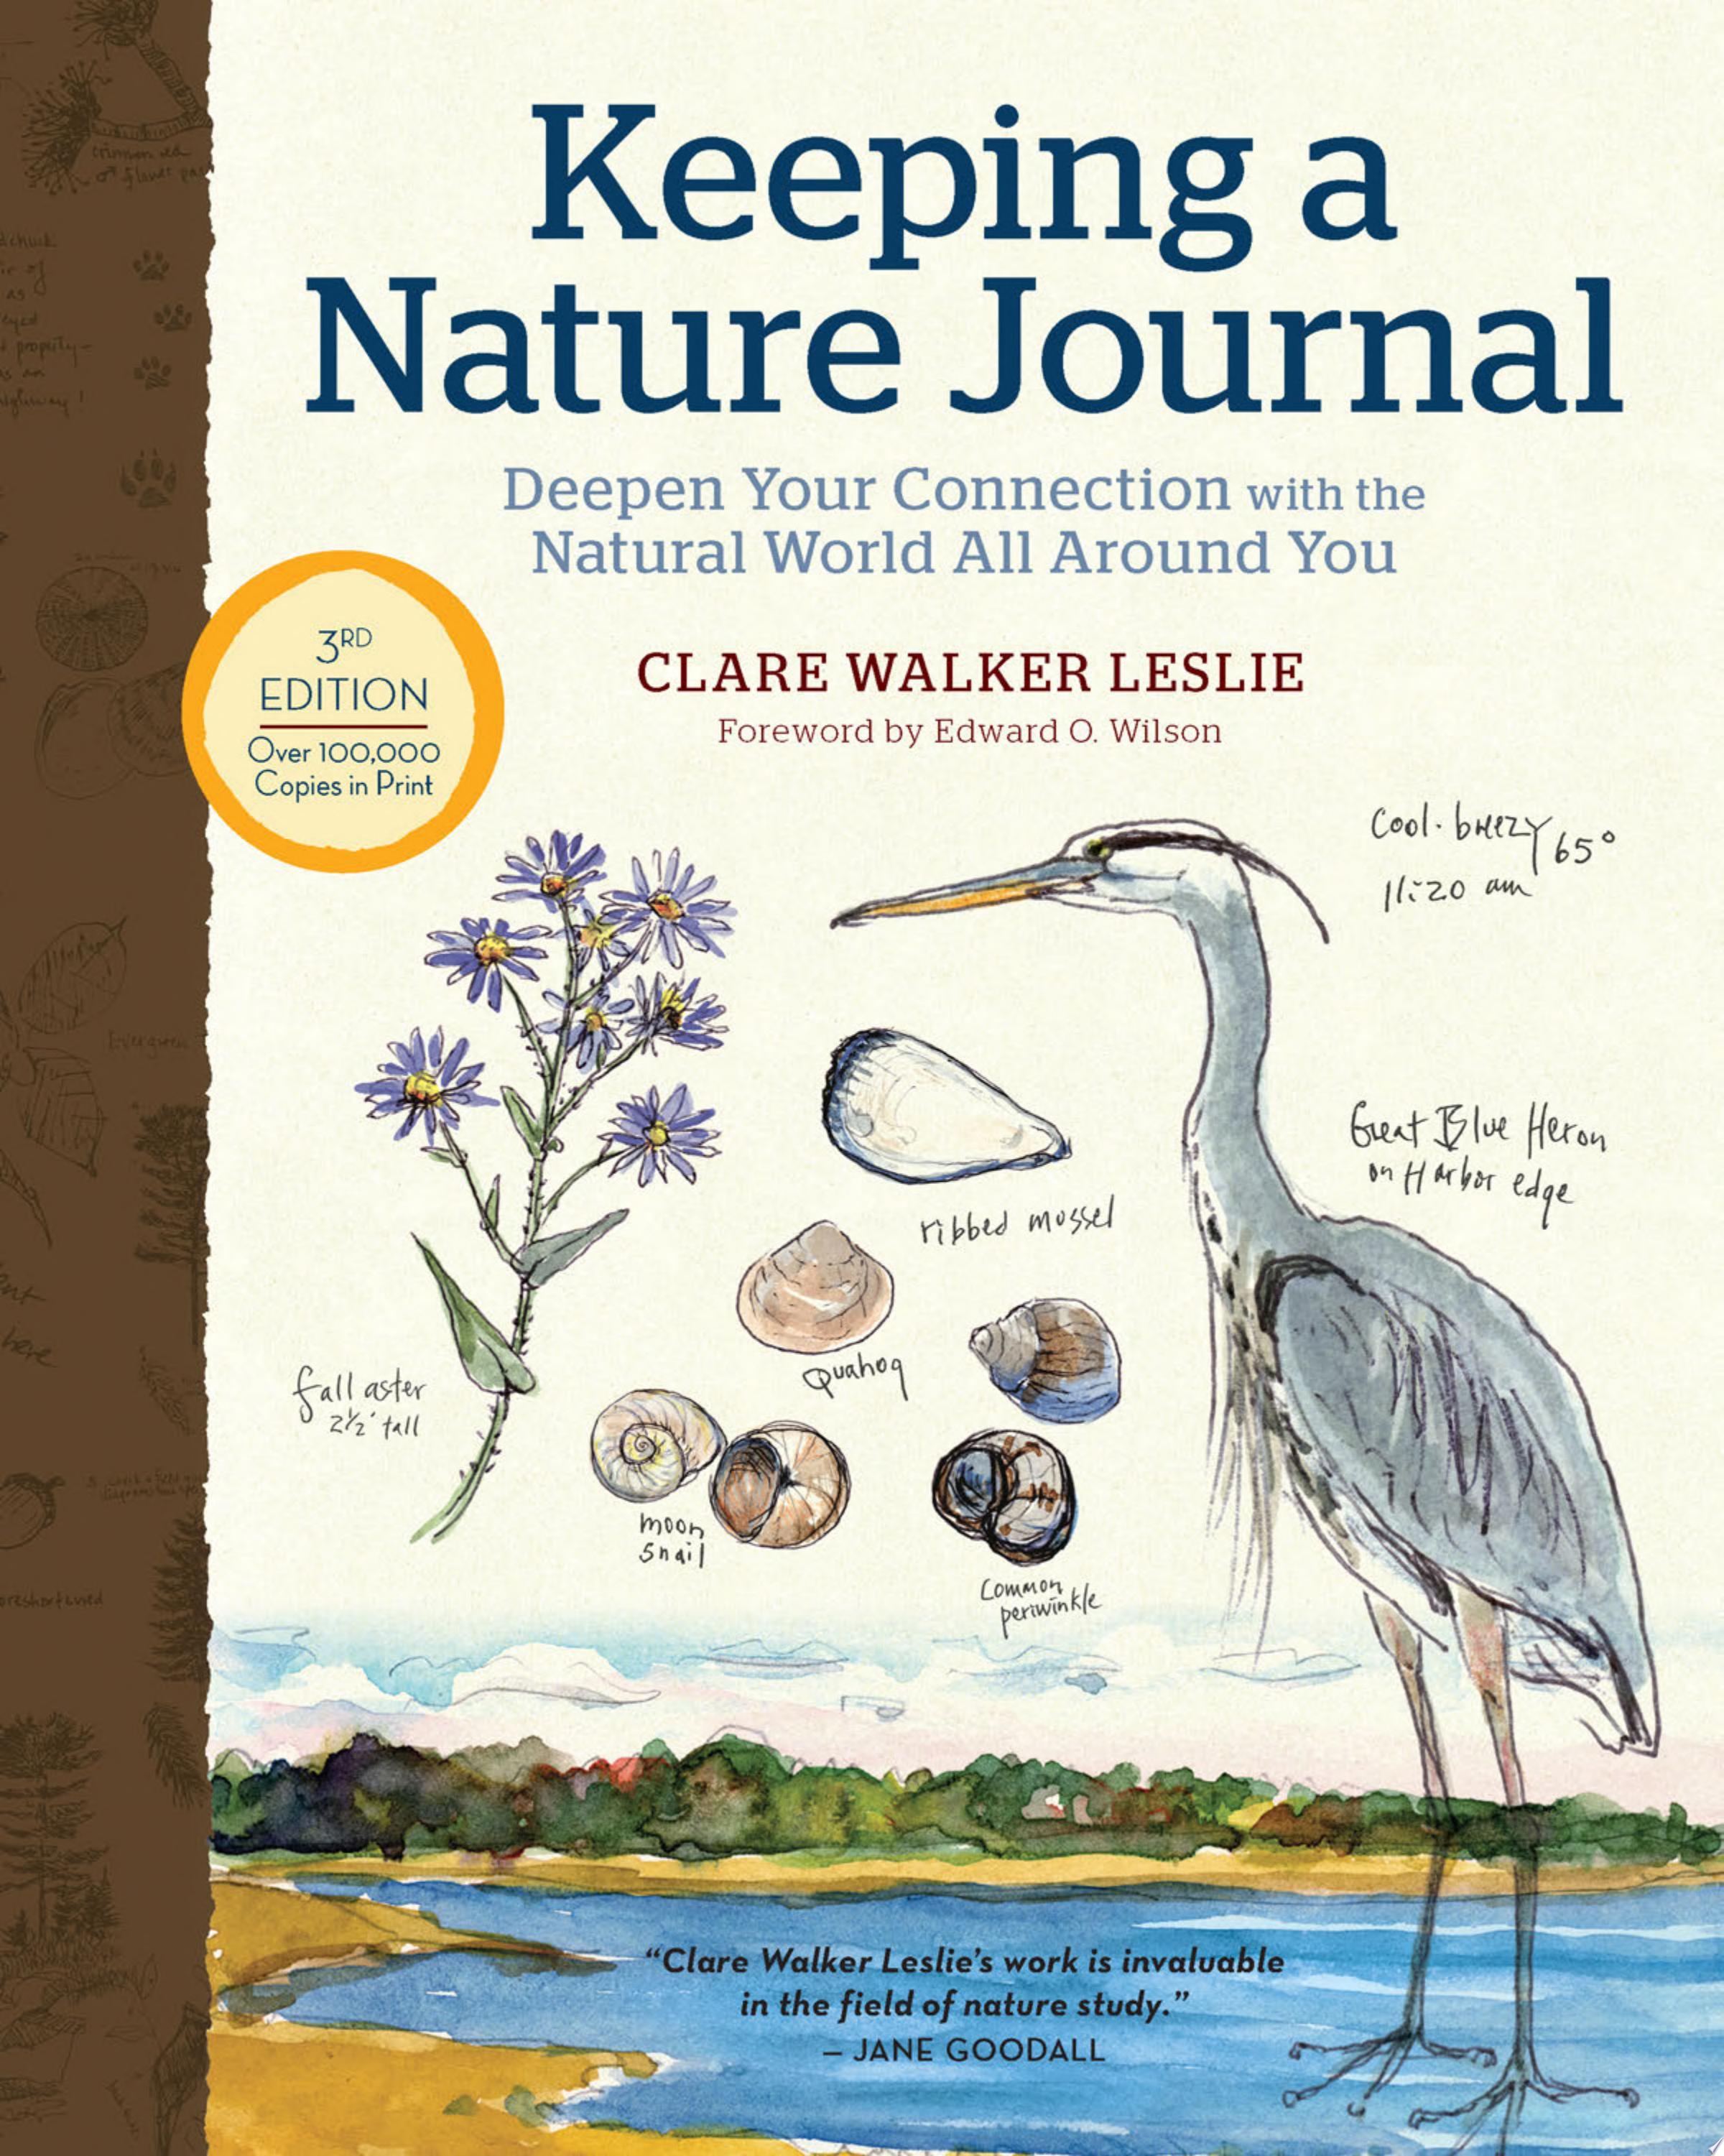 Image for "Keeping a Nature Journal, 3rd Edition"